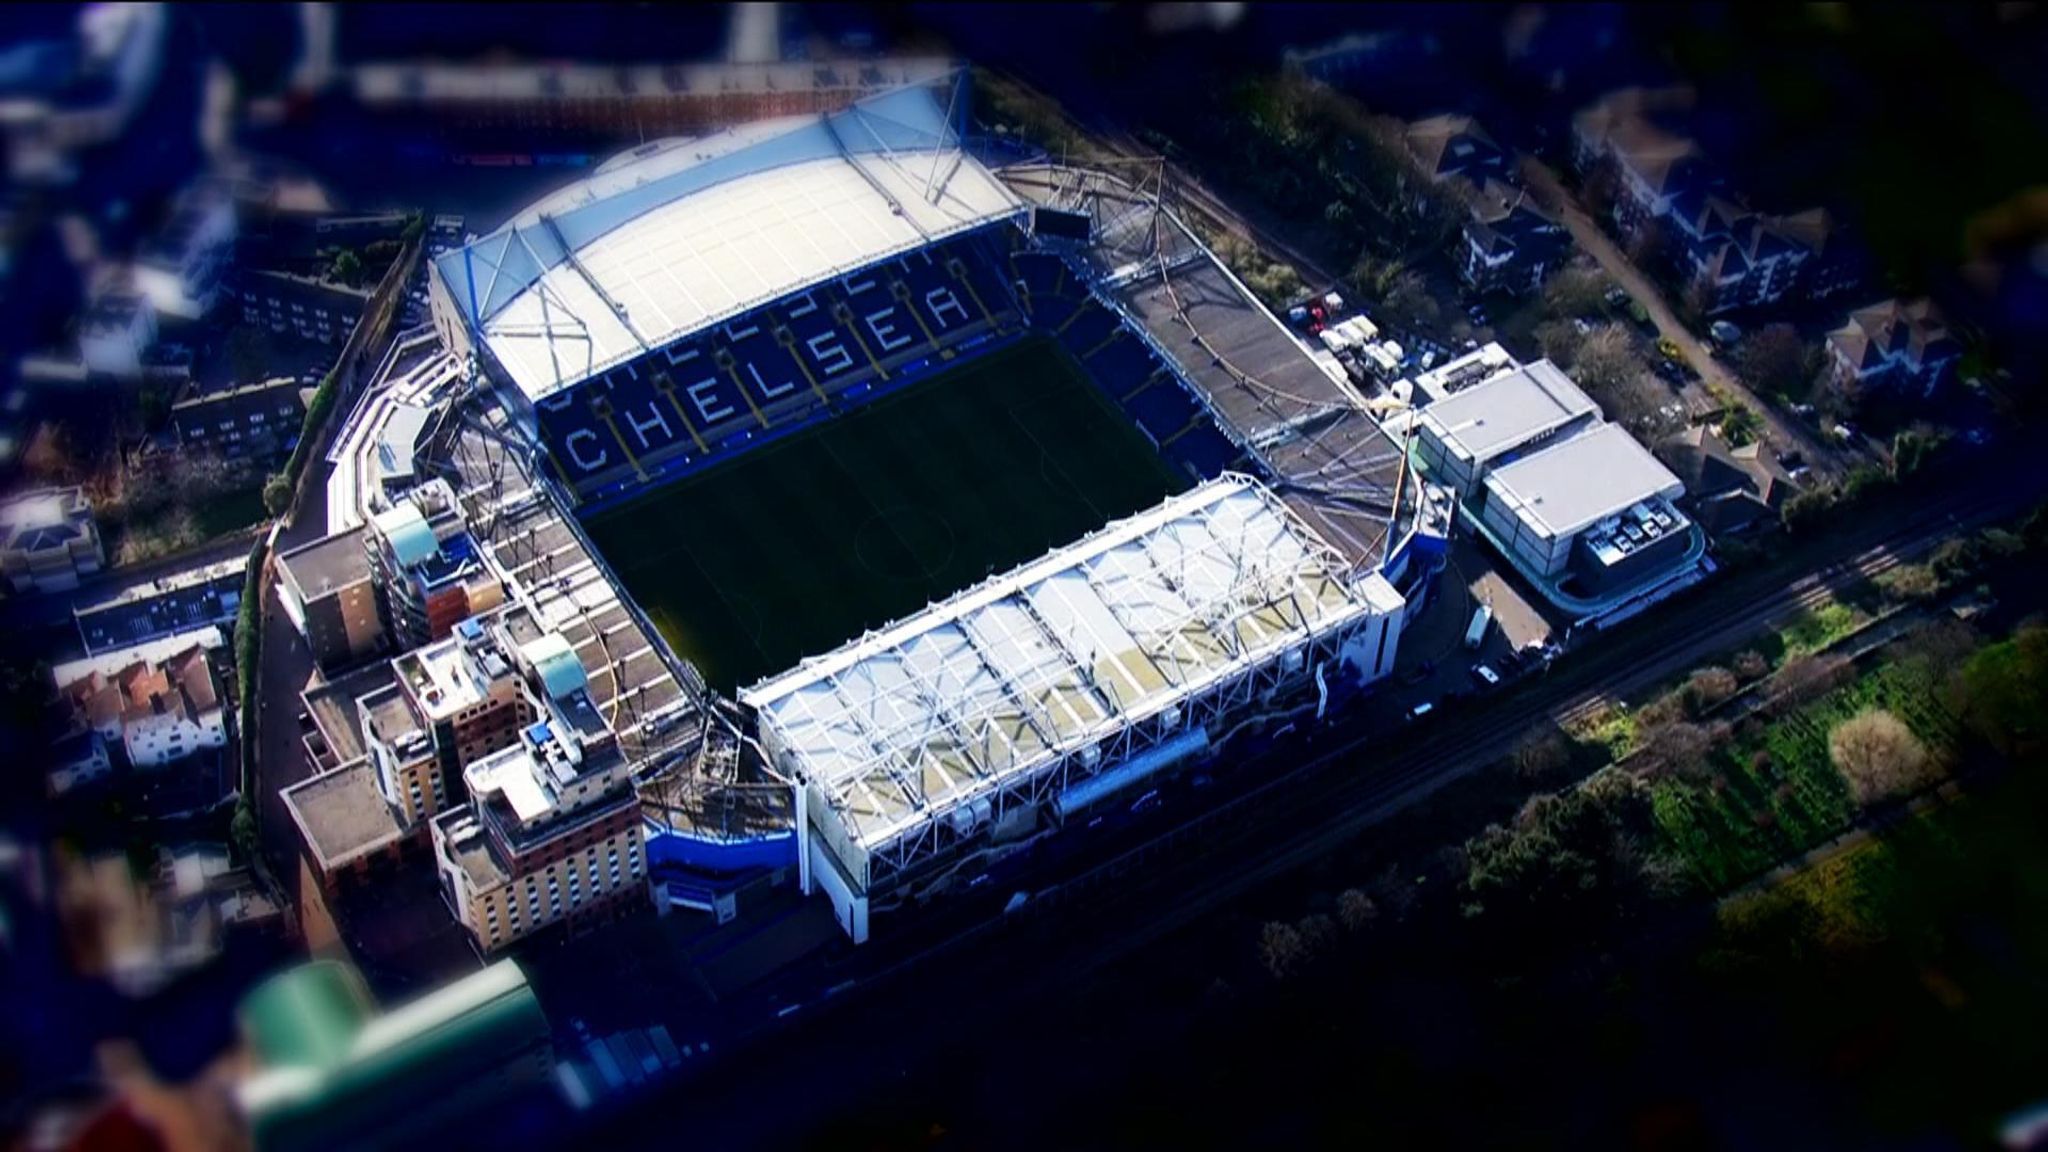 How much do Chelsea charge to hire out Stamford Bridge? Every